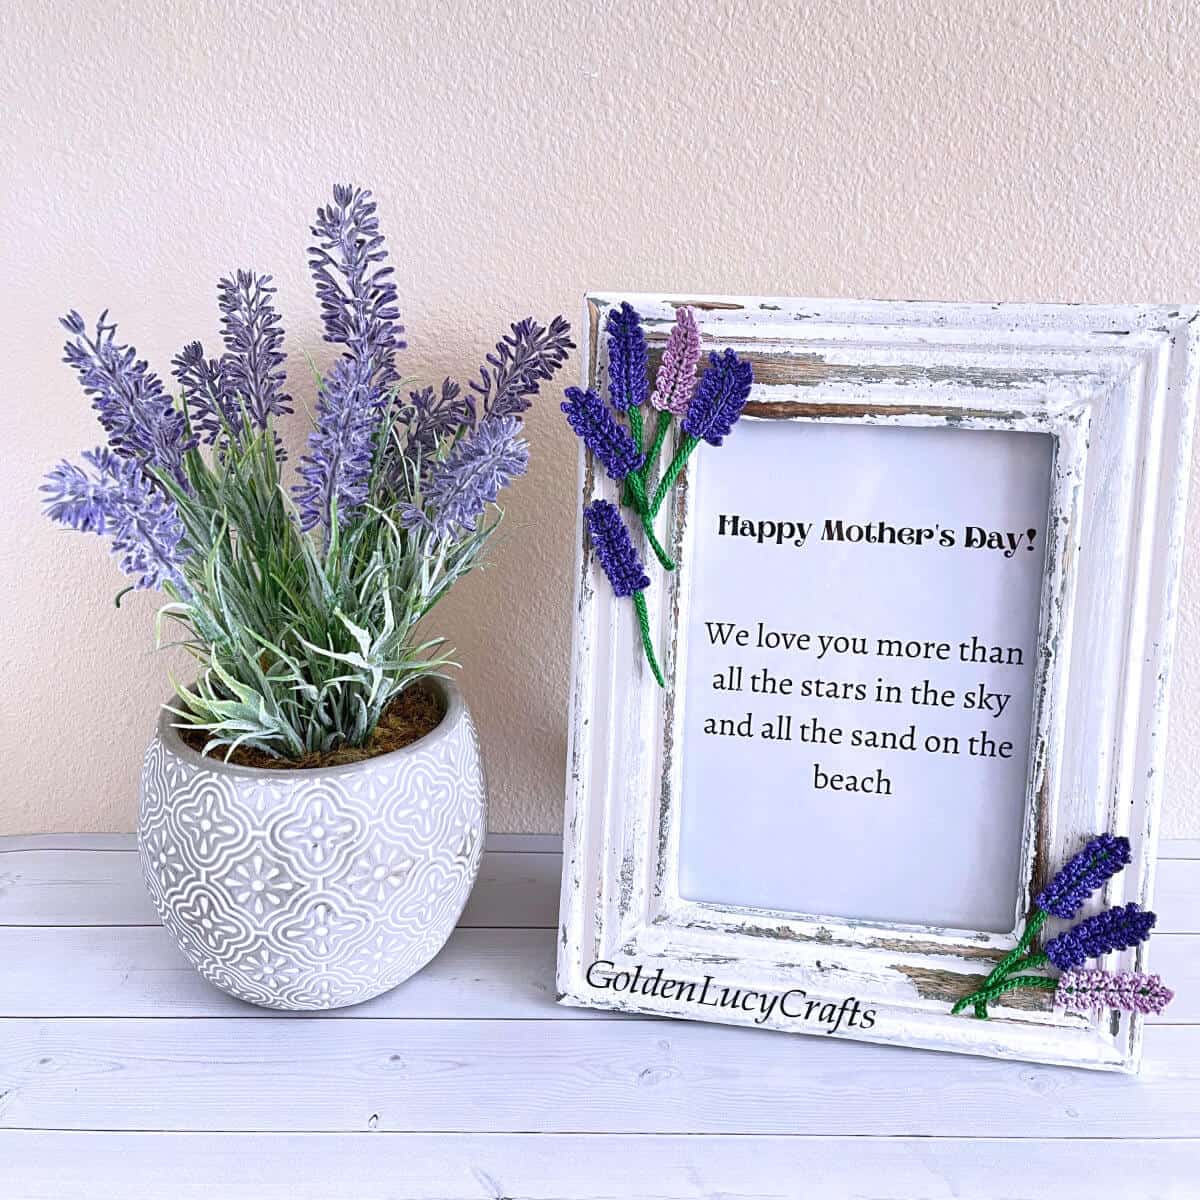 Mother's Day picture frame embellished with crochet lavender flowers, lavender in a pot next to it.